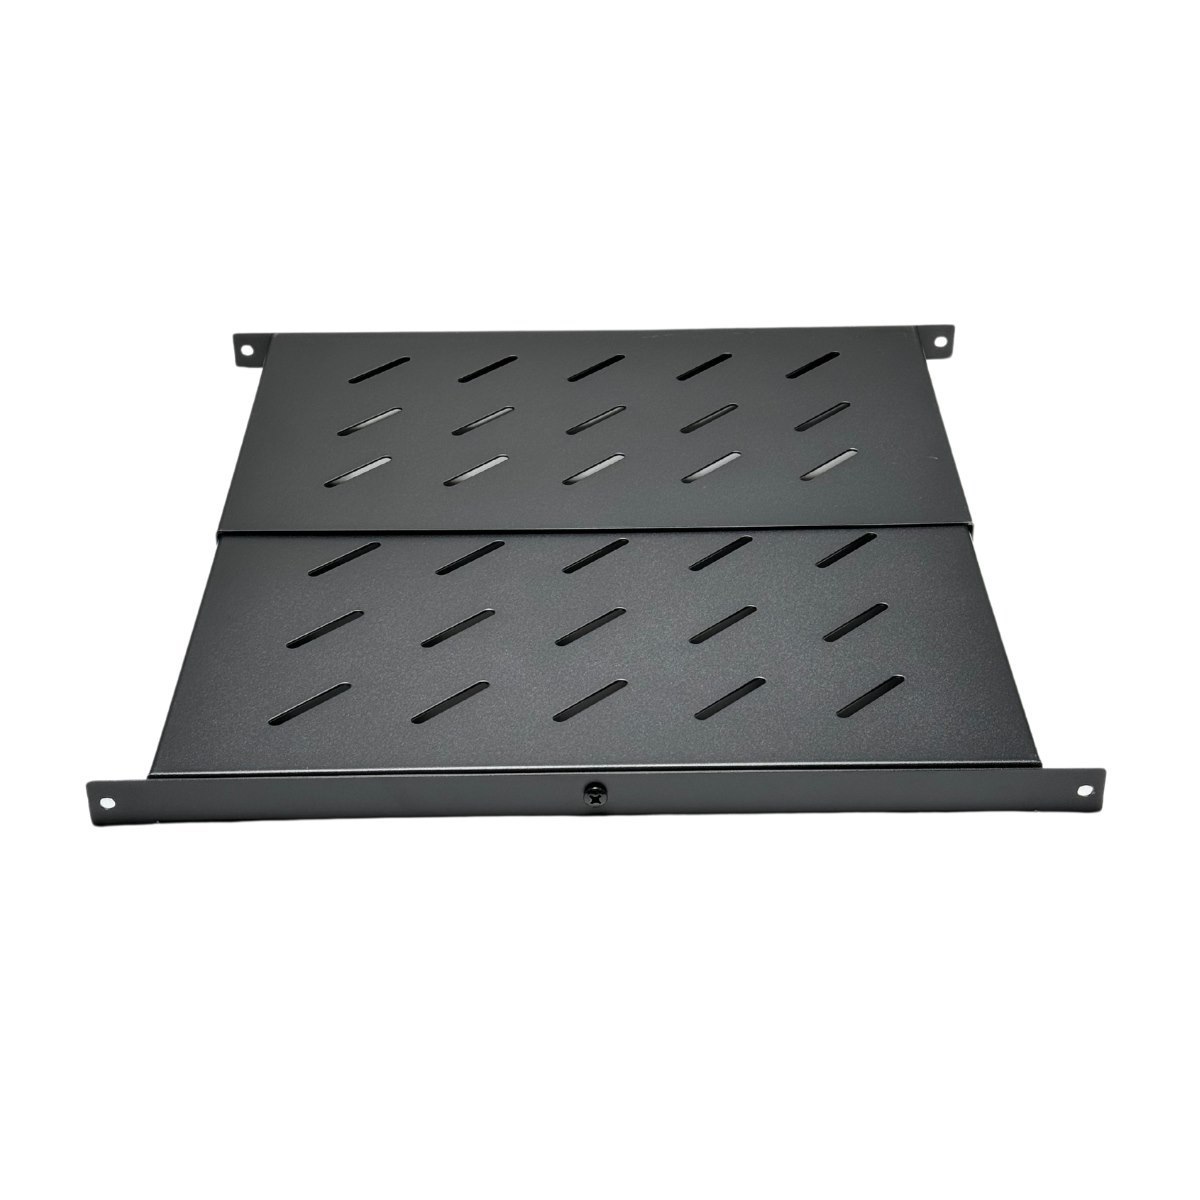 Serveredge 1Ru Universal Fixed Shelf 260MM To 430MM Deep Suitable For Wall Mount Cabinets.